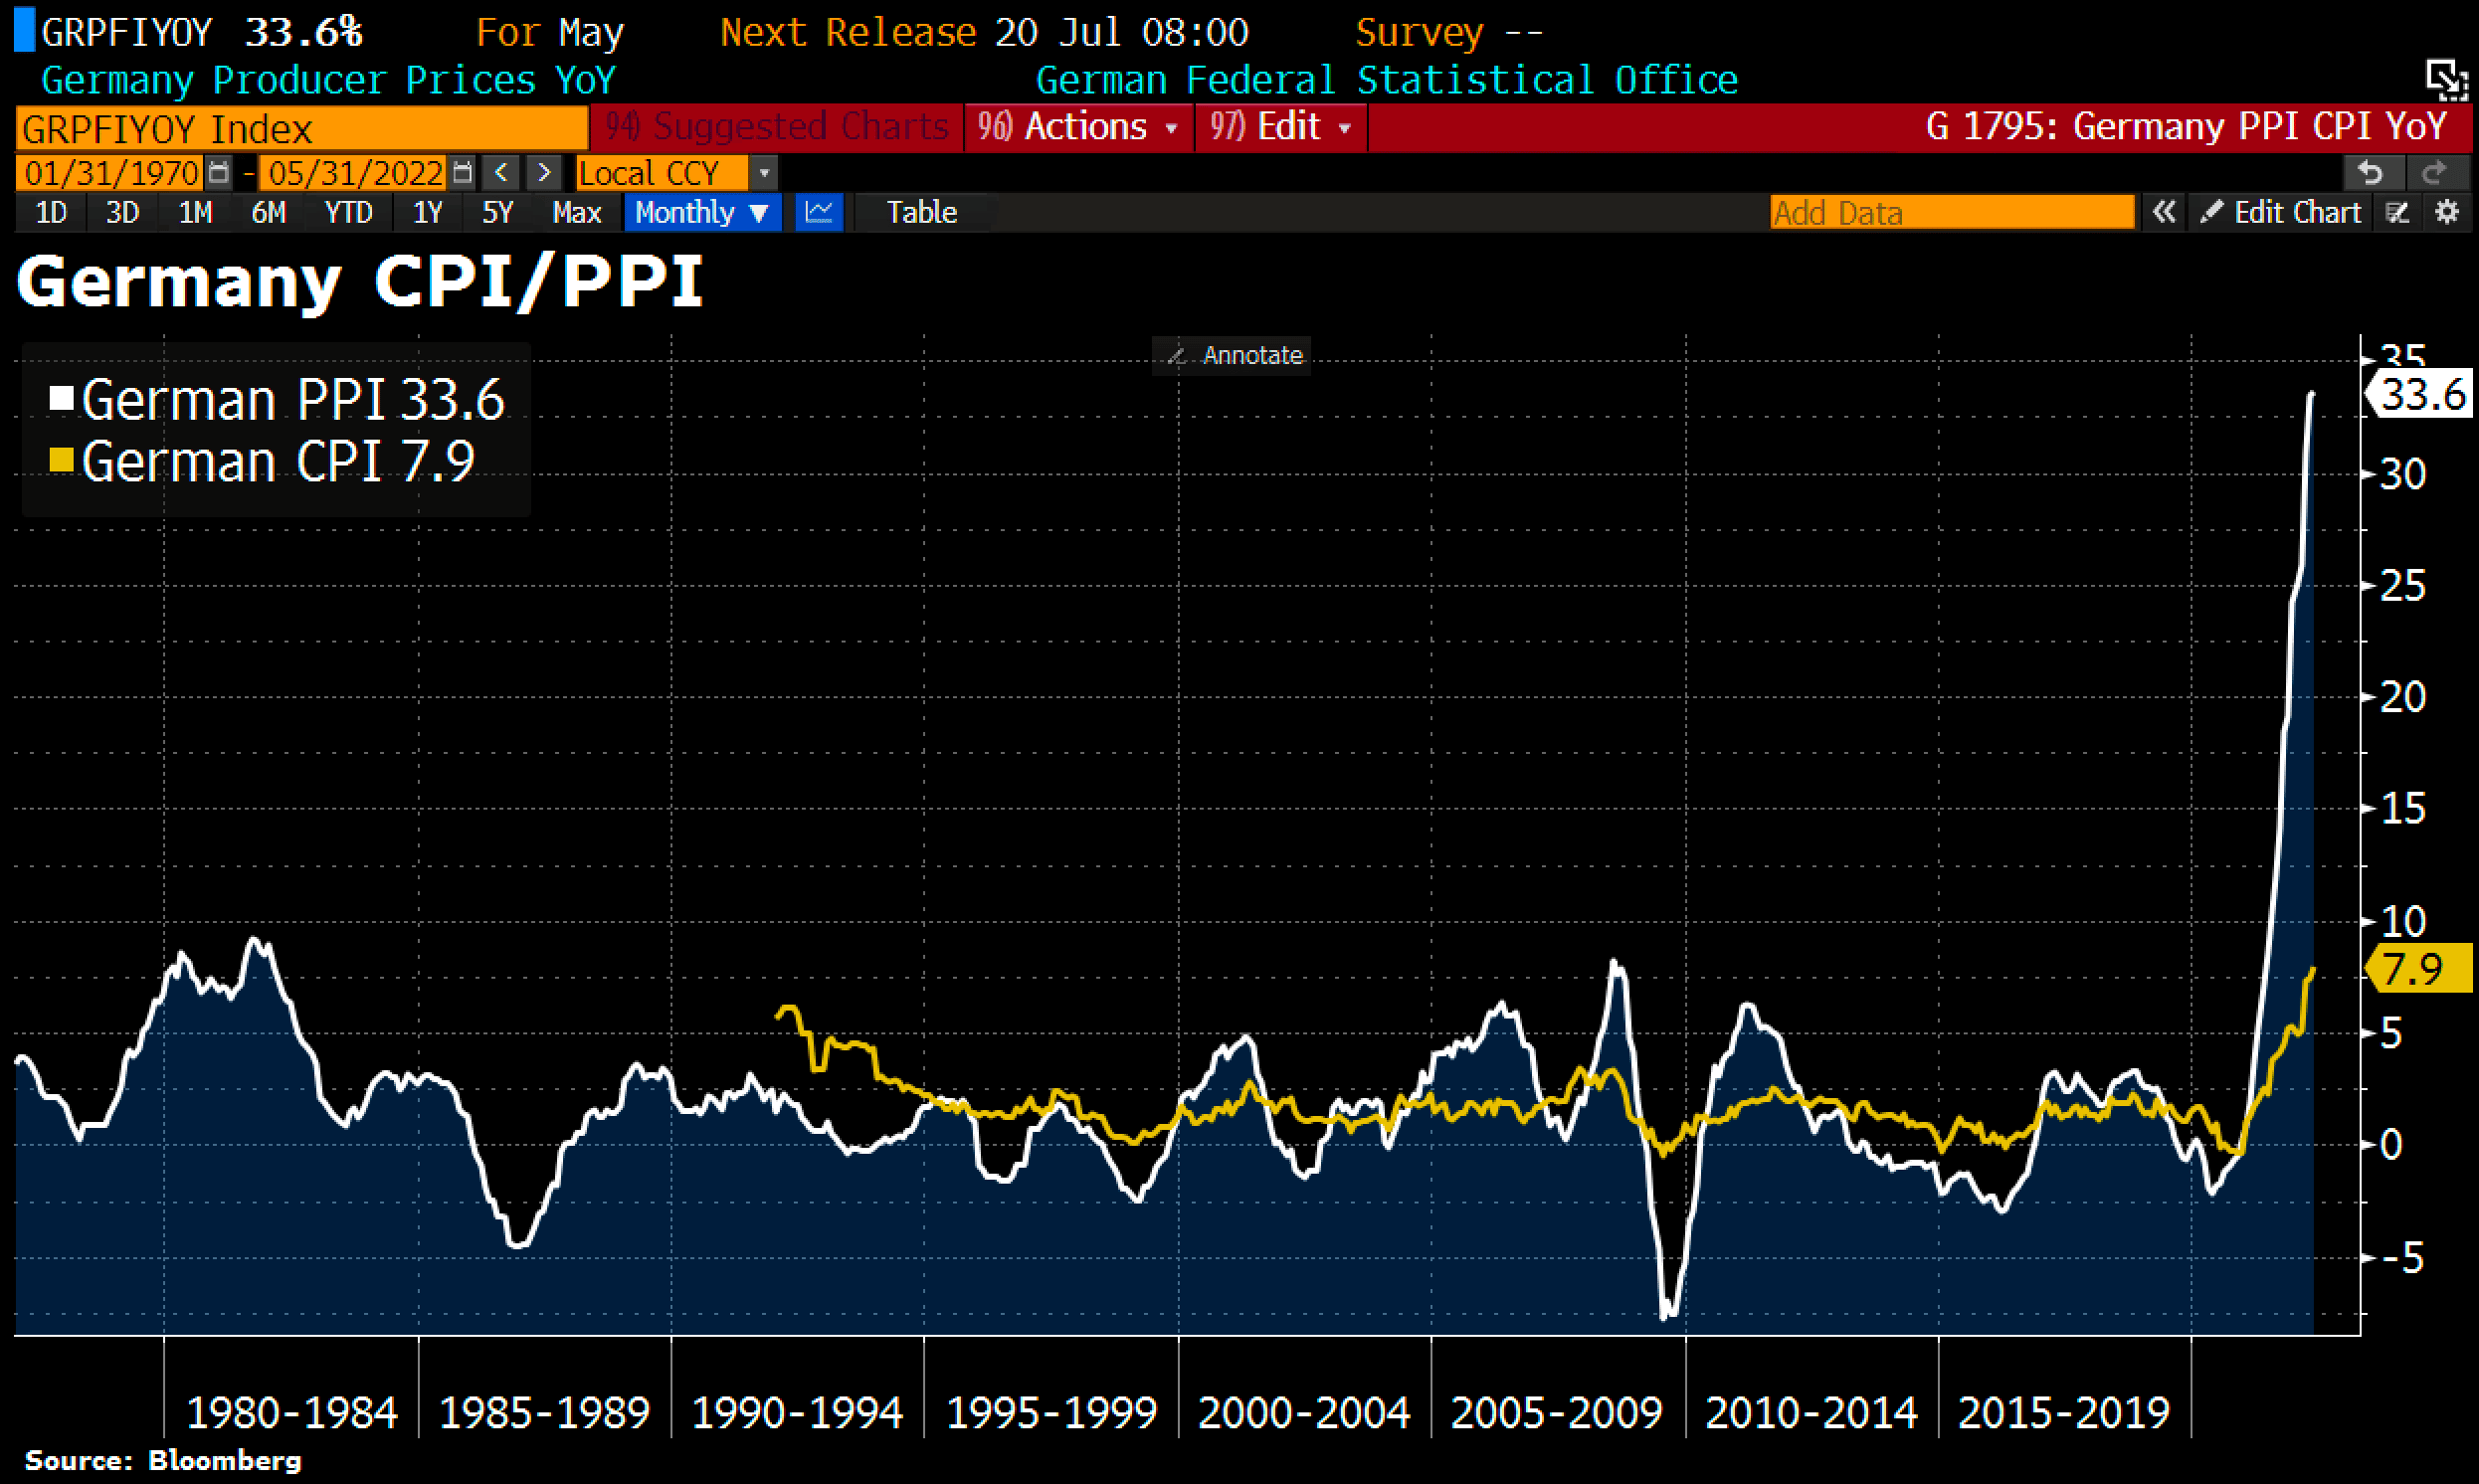 German Producer Prices/German Consumer Prices